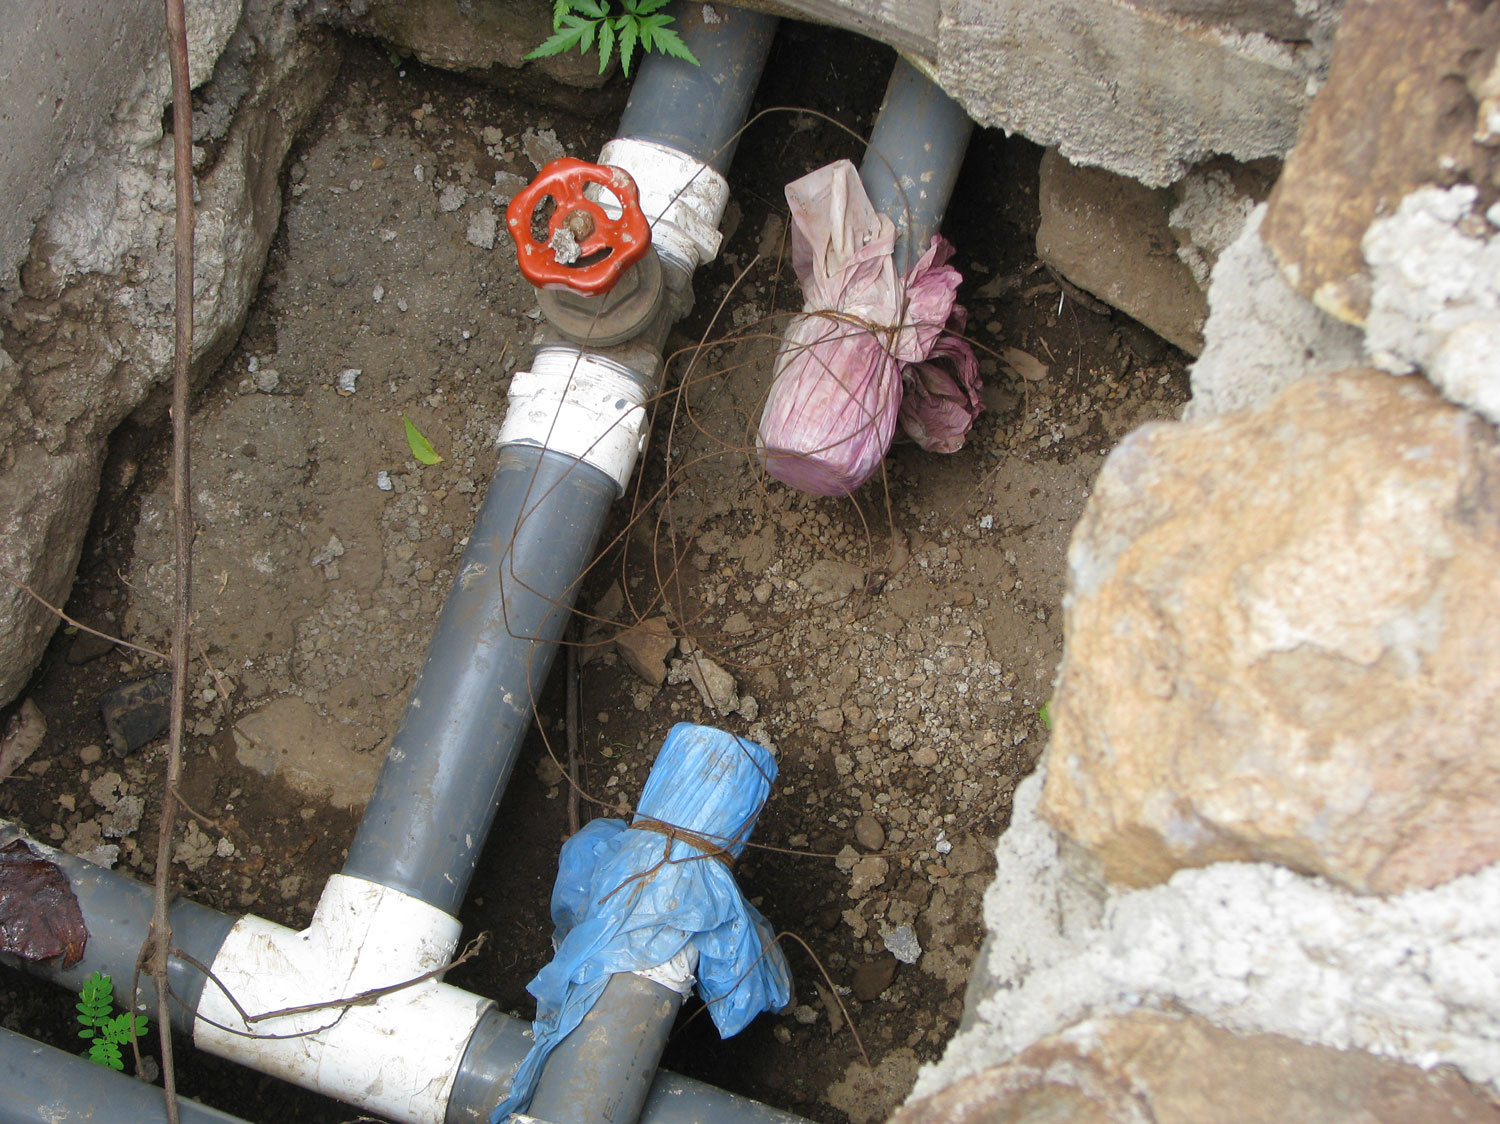 Pipes in the community of La Union ... the red valve pipe has arsenic but is safe for washing clothes, bathing, etc. The blue covered pipe is the drinking water free from arsenic piped from a spring higher up on the volcano.